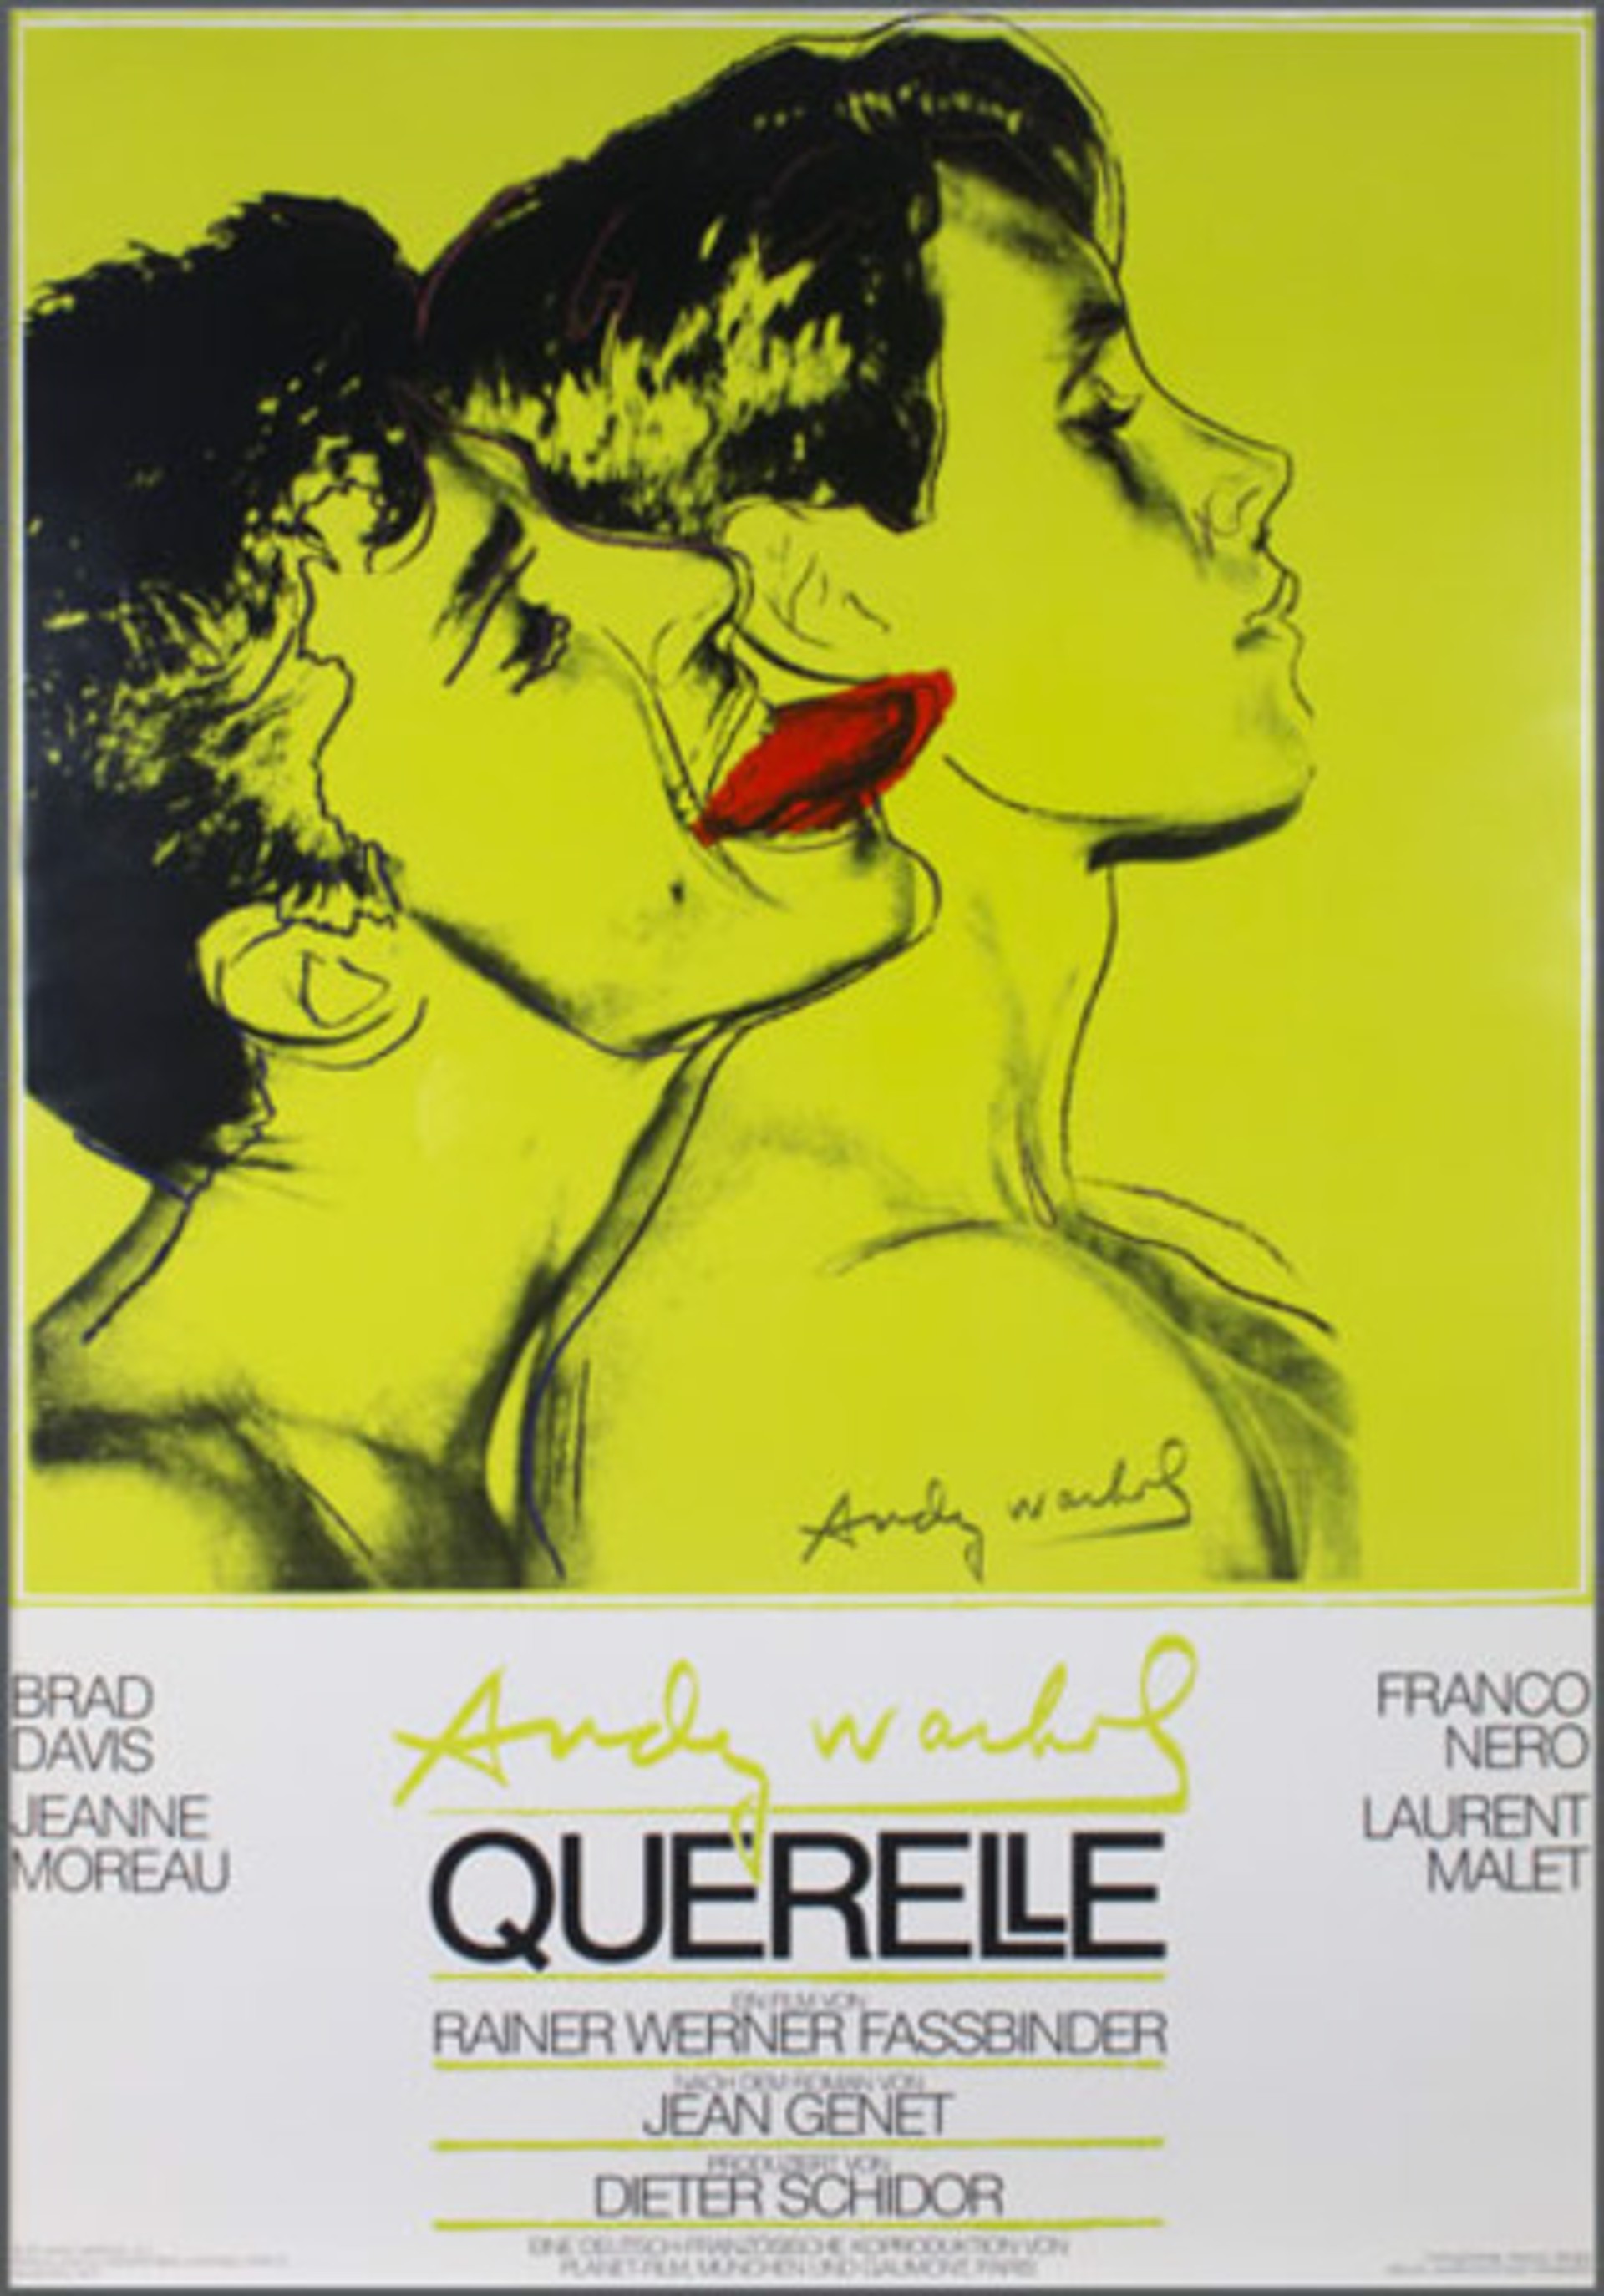 Querelle by Andy Warhol